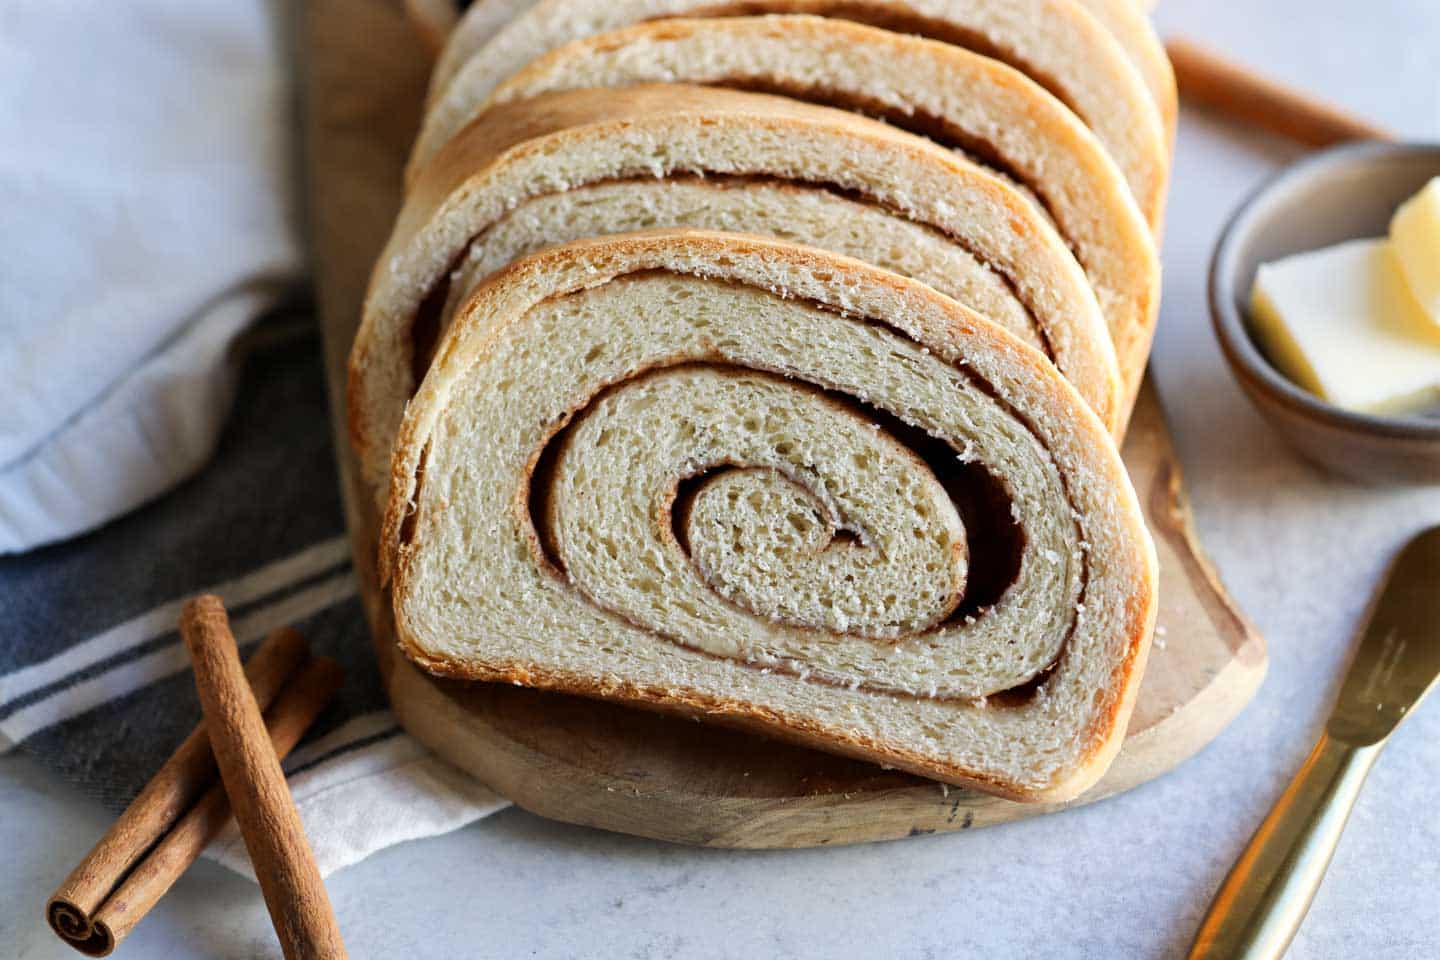 upclose shot of the swirled bread with cinnamon on a cutting board